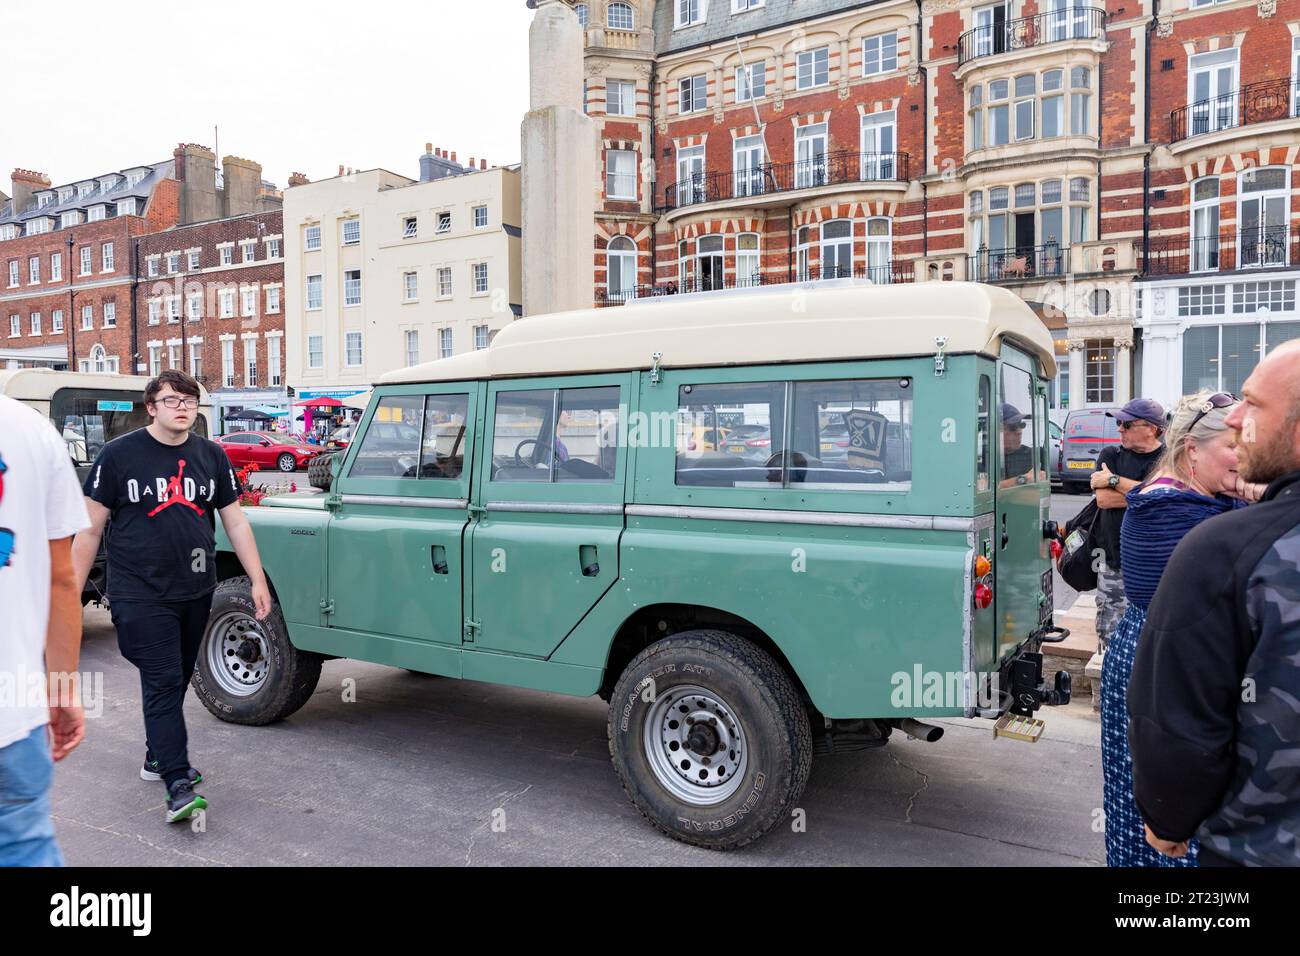 Dorset car club public event on Weymouth promenade with classic vintage Land Rover defender on display,England,UK,2023 Stock Photo